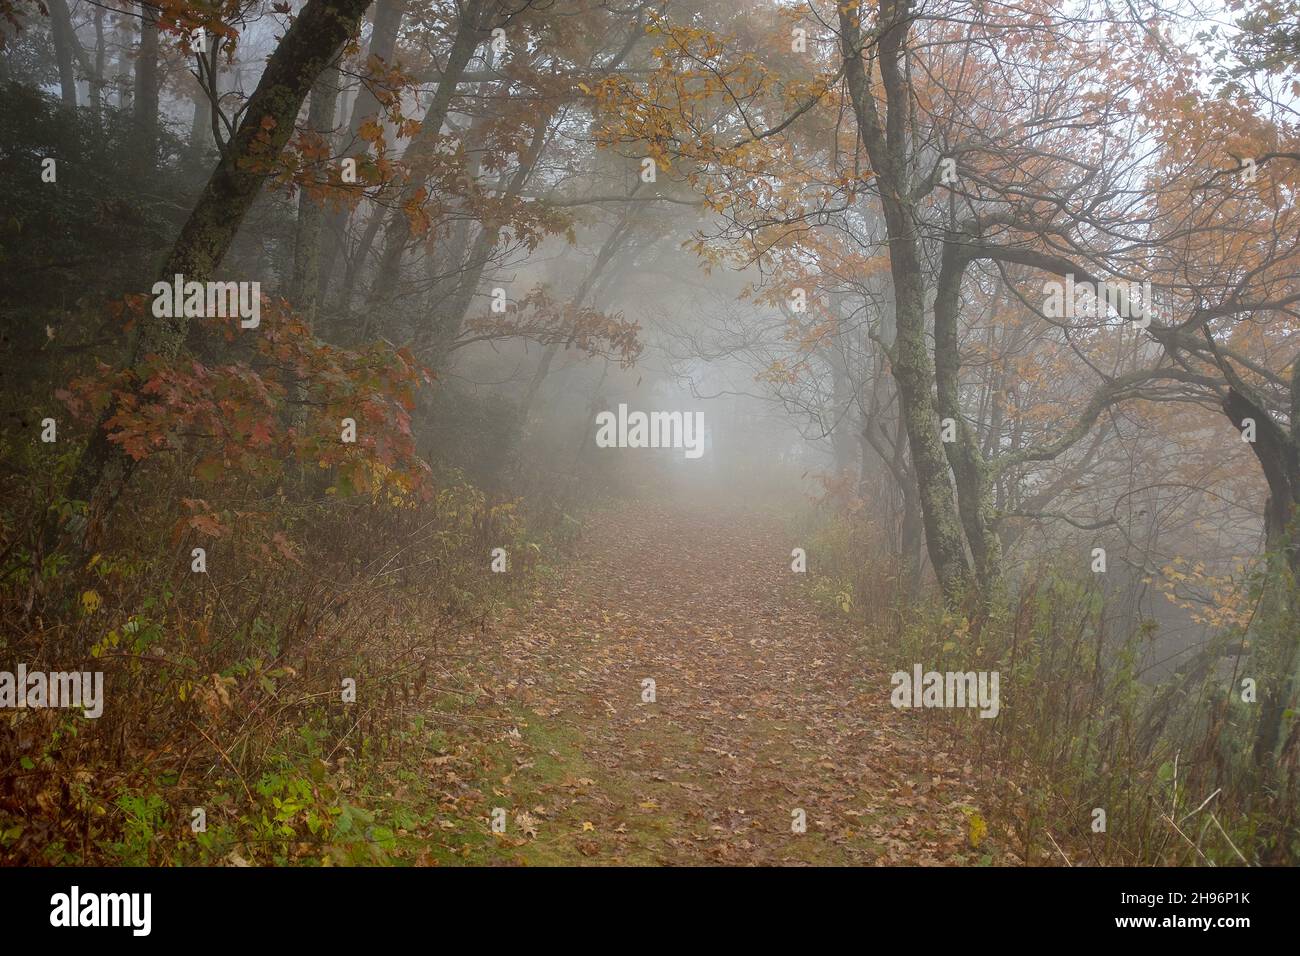 October 29, 2021: Early morning fog and mist bring a gentle atmosphere to North Carolina's Southern Highlands near the Blue Ridge Parkway, Brevard, North Carolina. Stock Photo